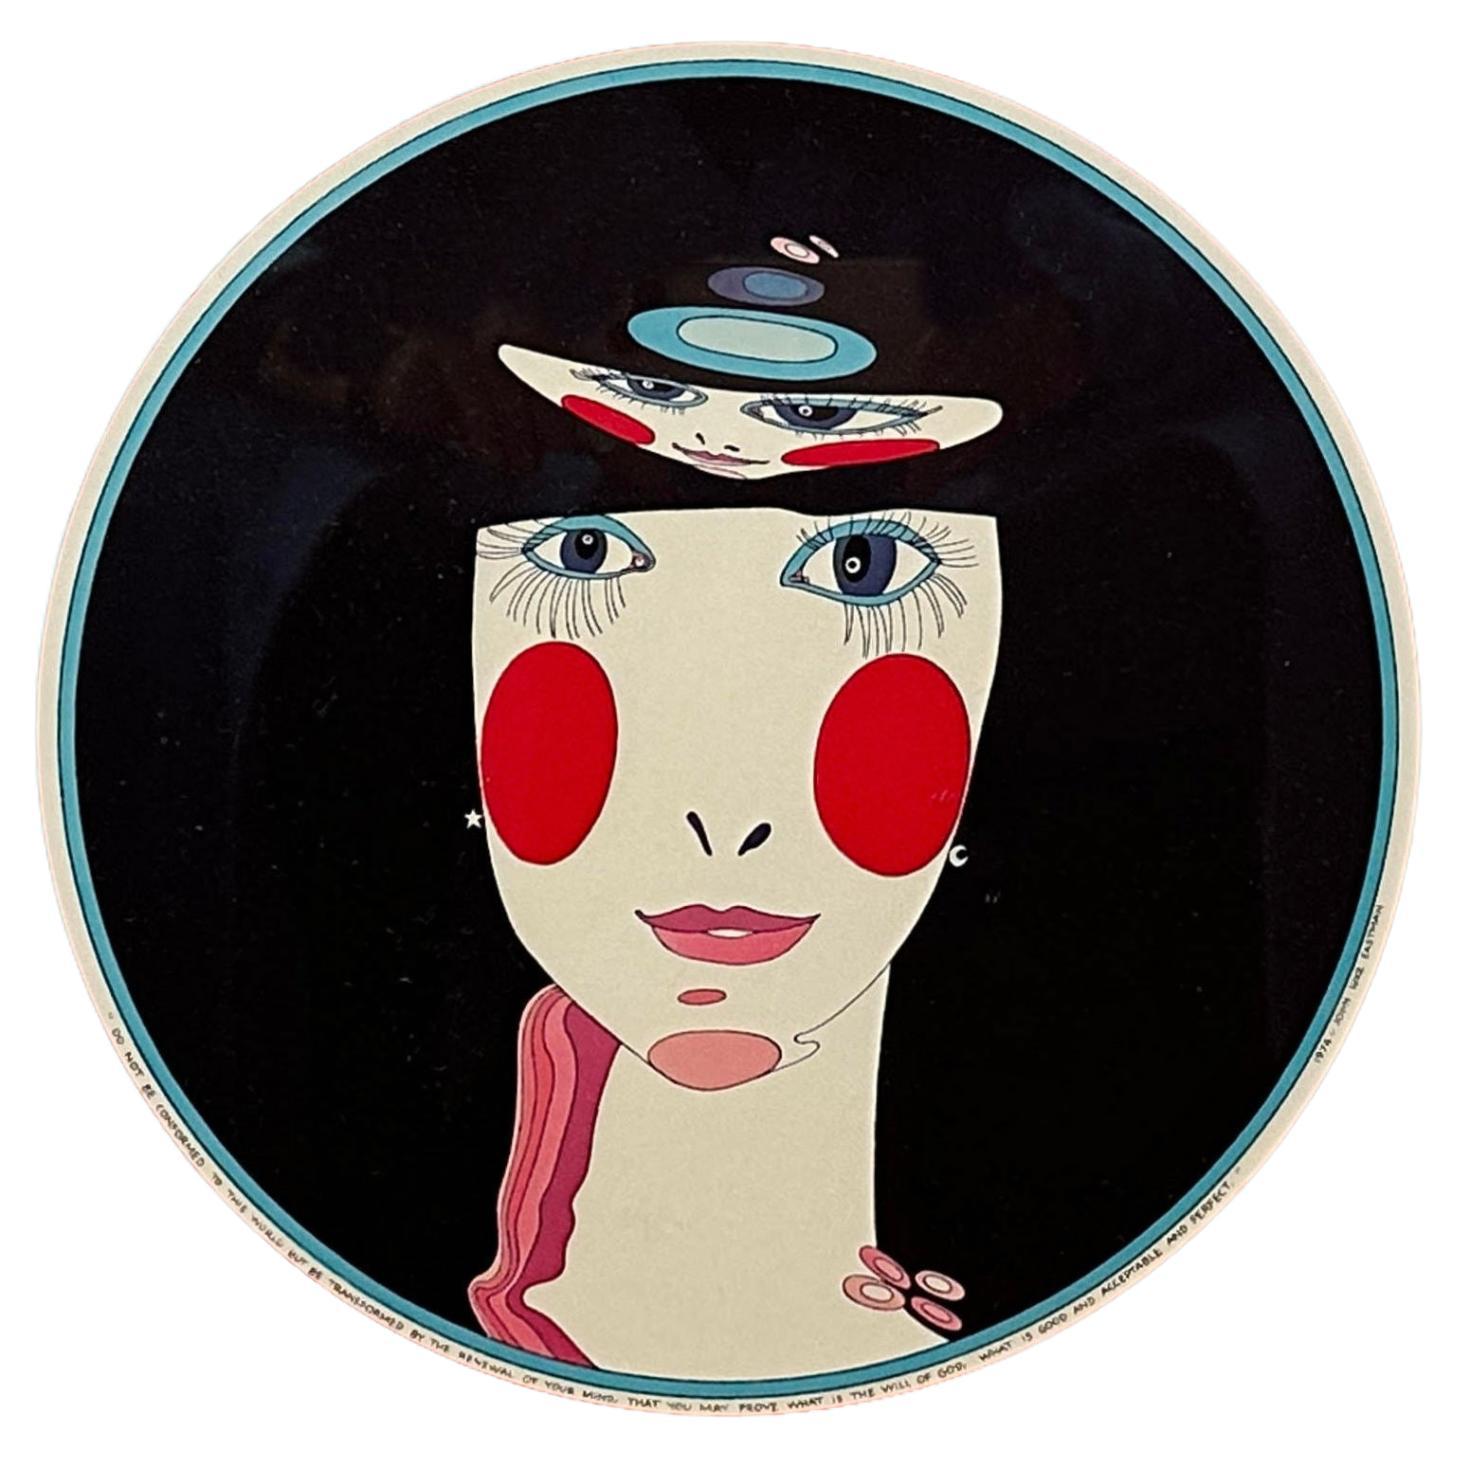 This lithograph, created by the artist John Luke Eastman combines vintage beauty inspirations with a surreal atmosphere. Its square frame and vibrant red backdrop draw our attention towards the center. Within this space, a stylized face, reminiscent